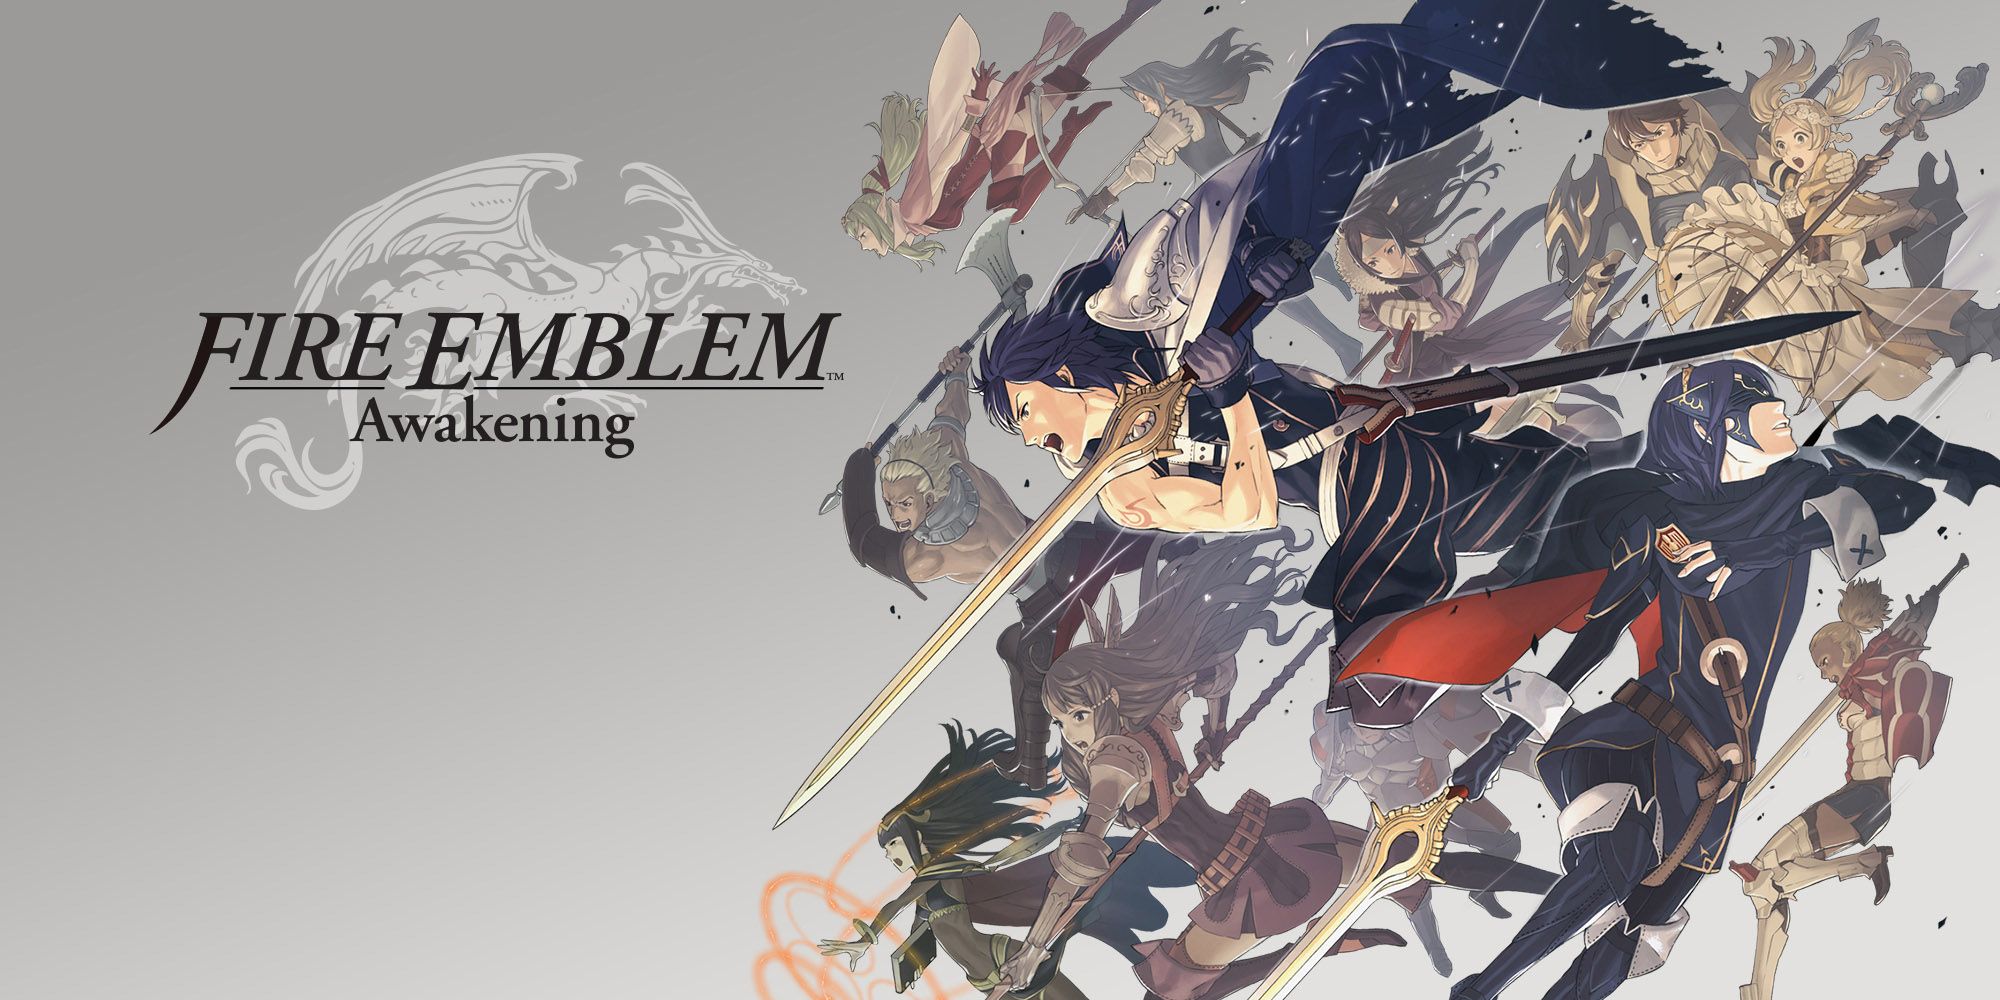 The cover art for Fire Emblem Awakening featuring characters from the game